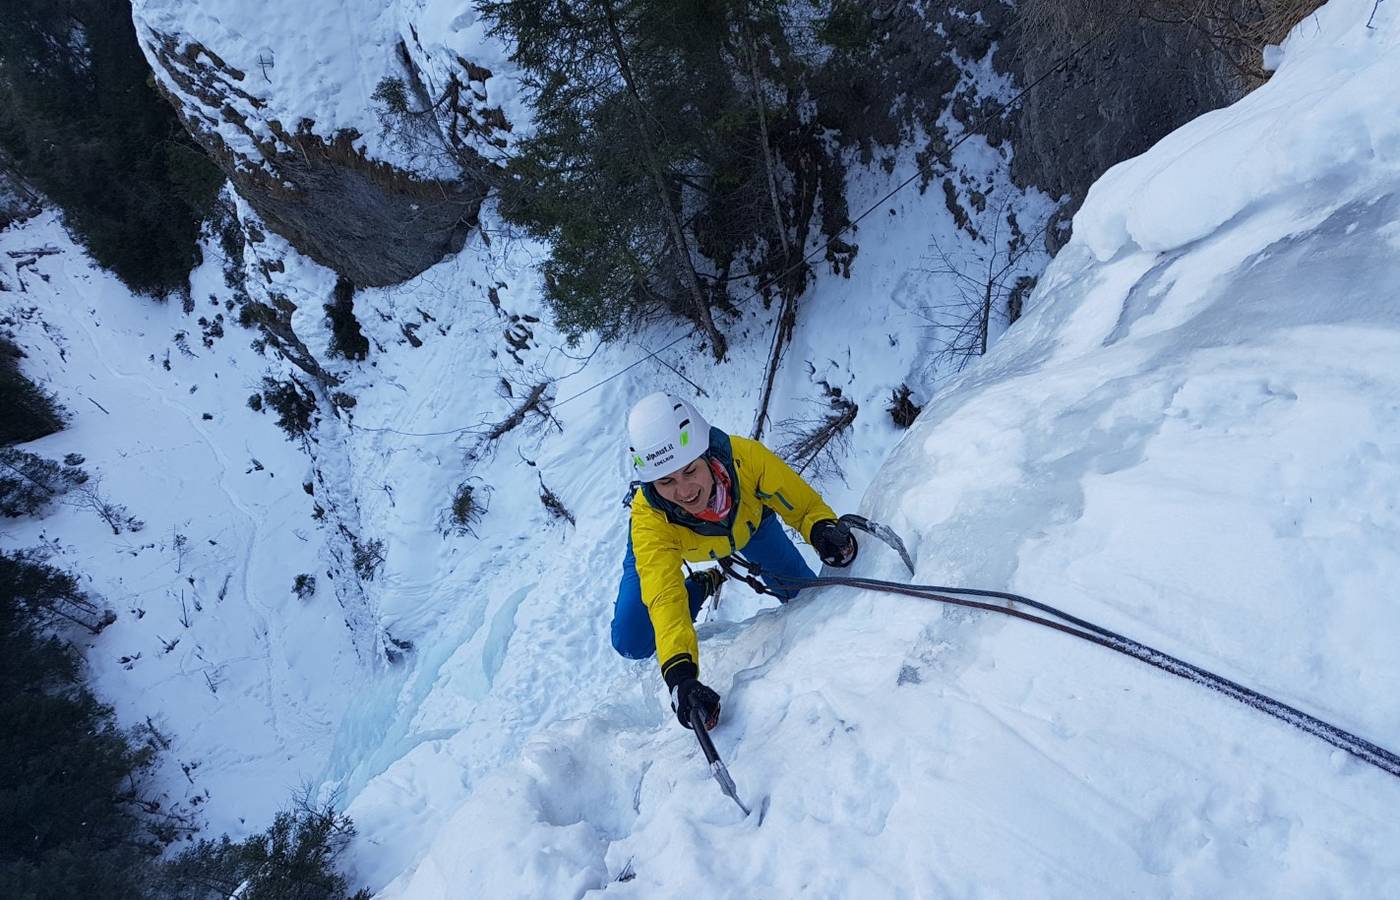 Ice climbing at the waterfalls in Mauls